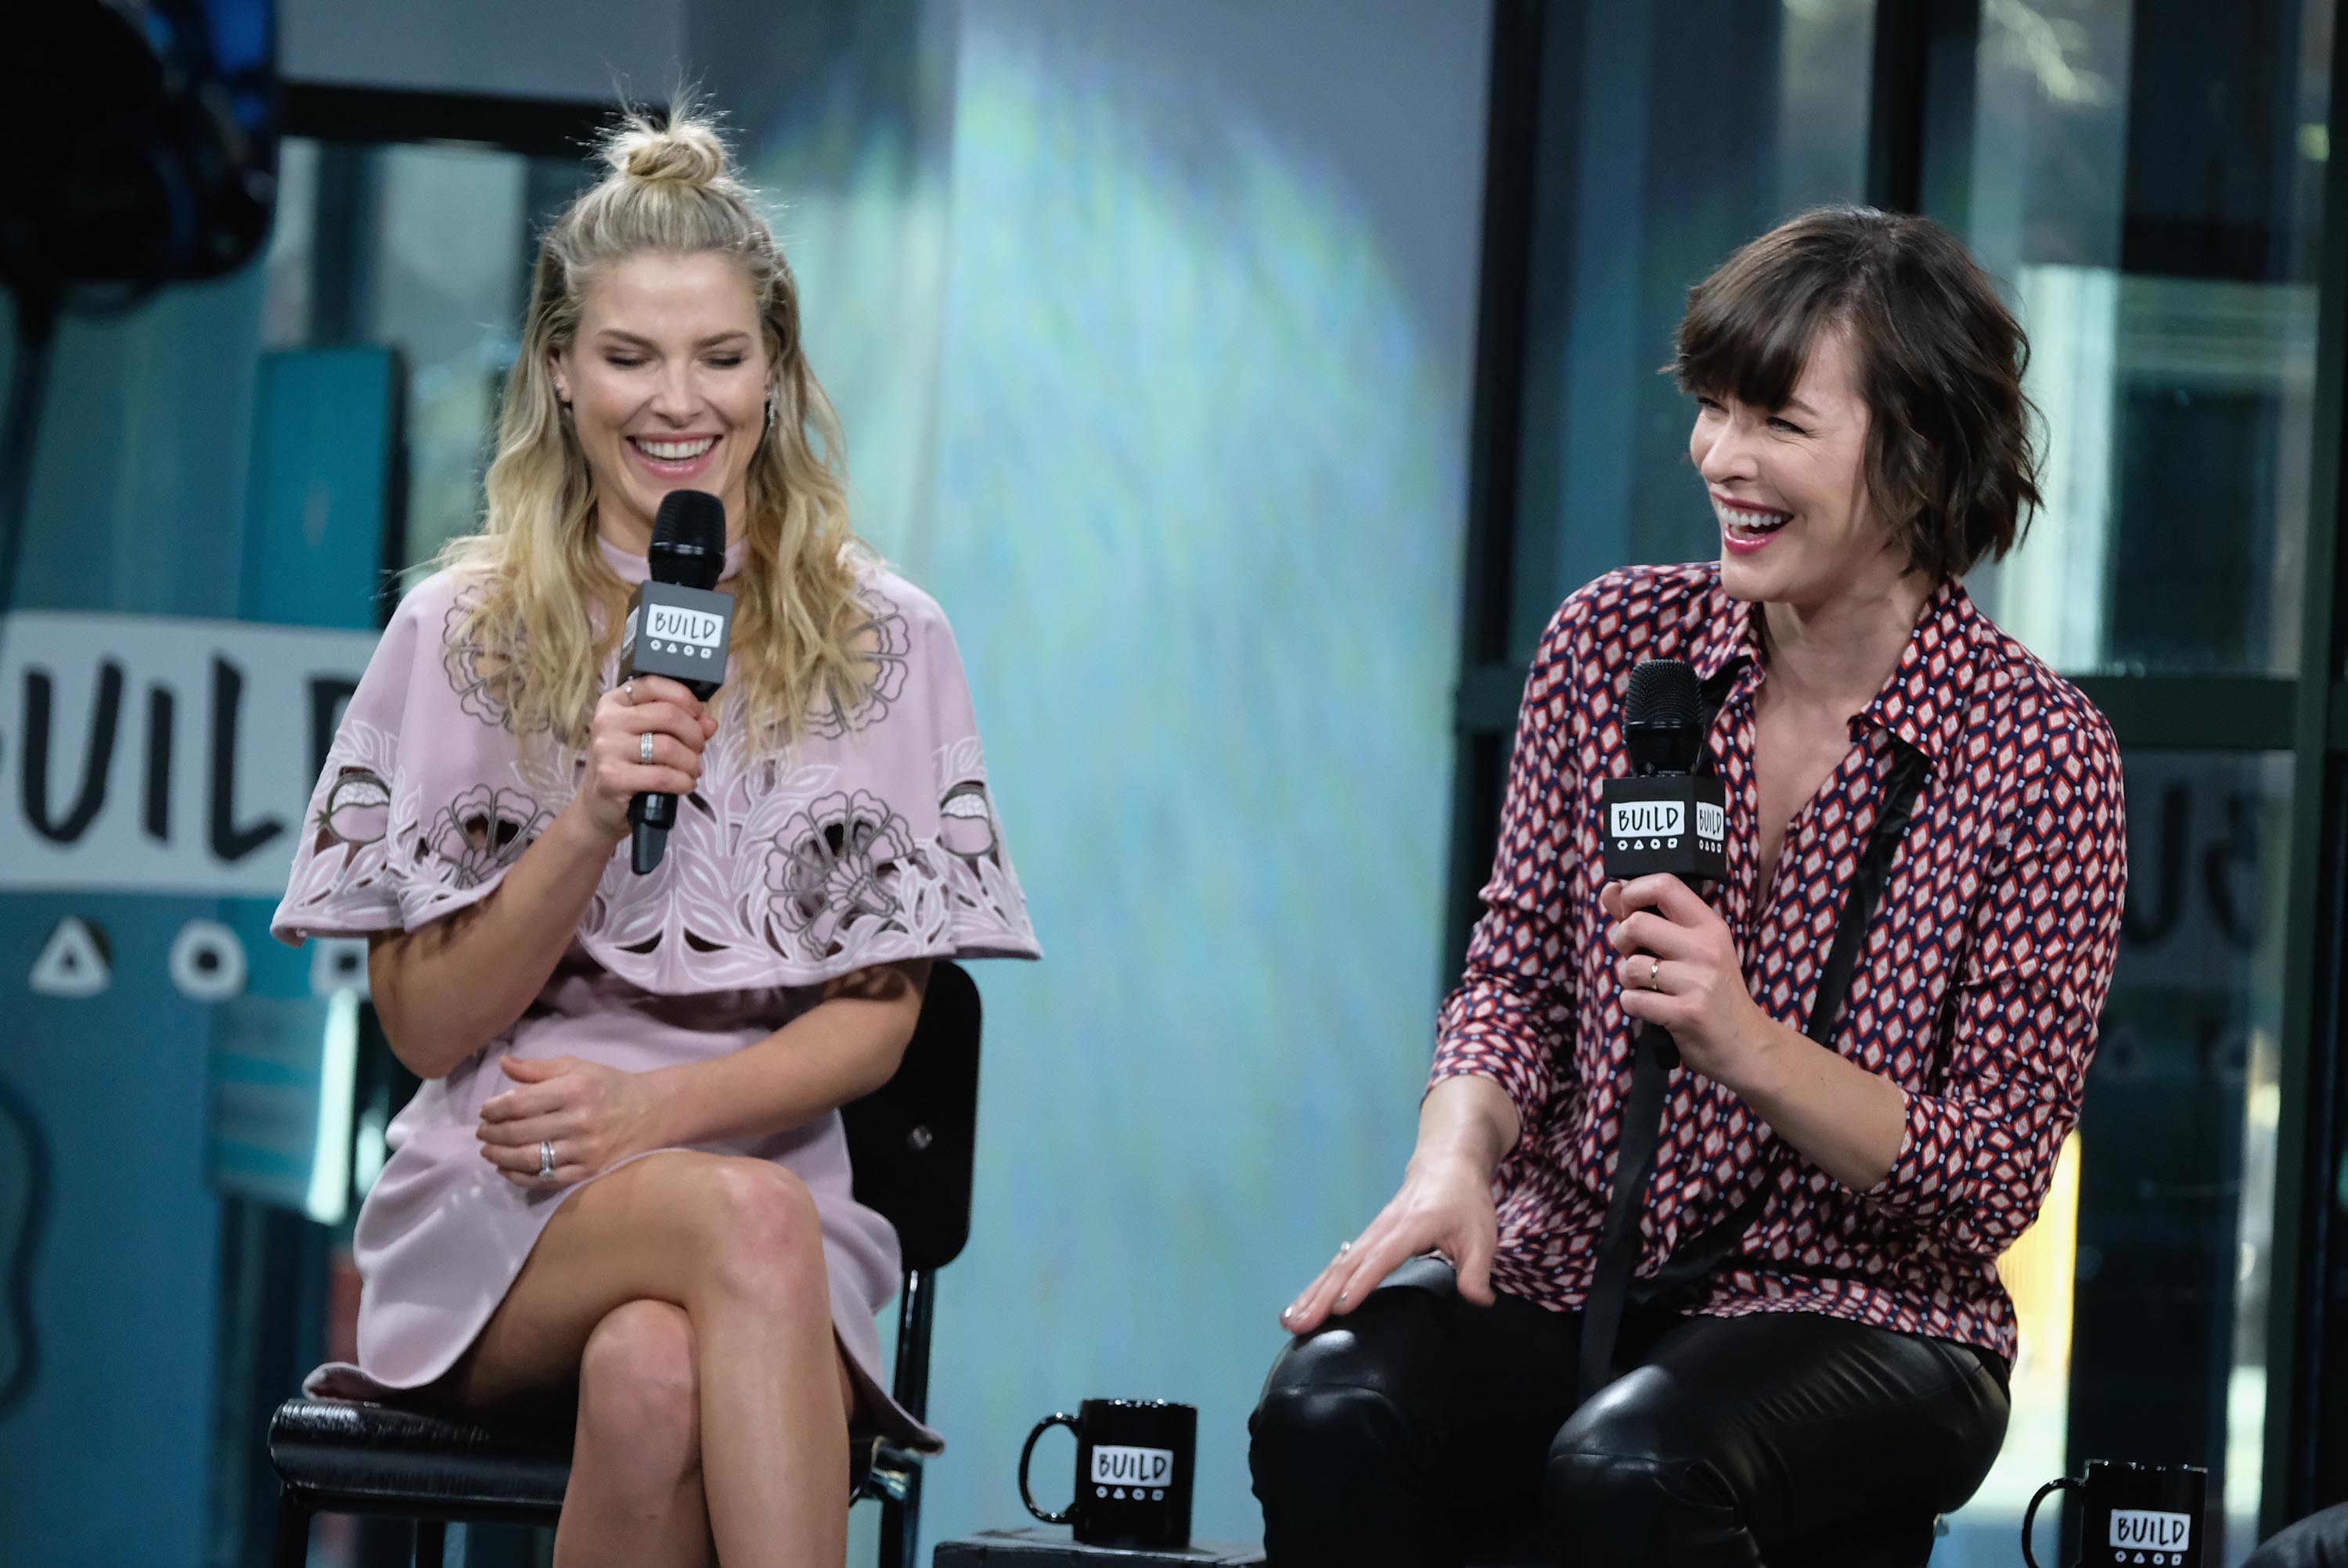 Milla Jovovich attends Build Series to discuss ‘Resident Evil: The Final Chapter’